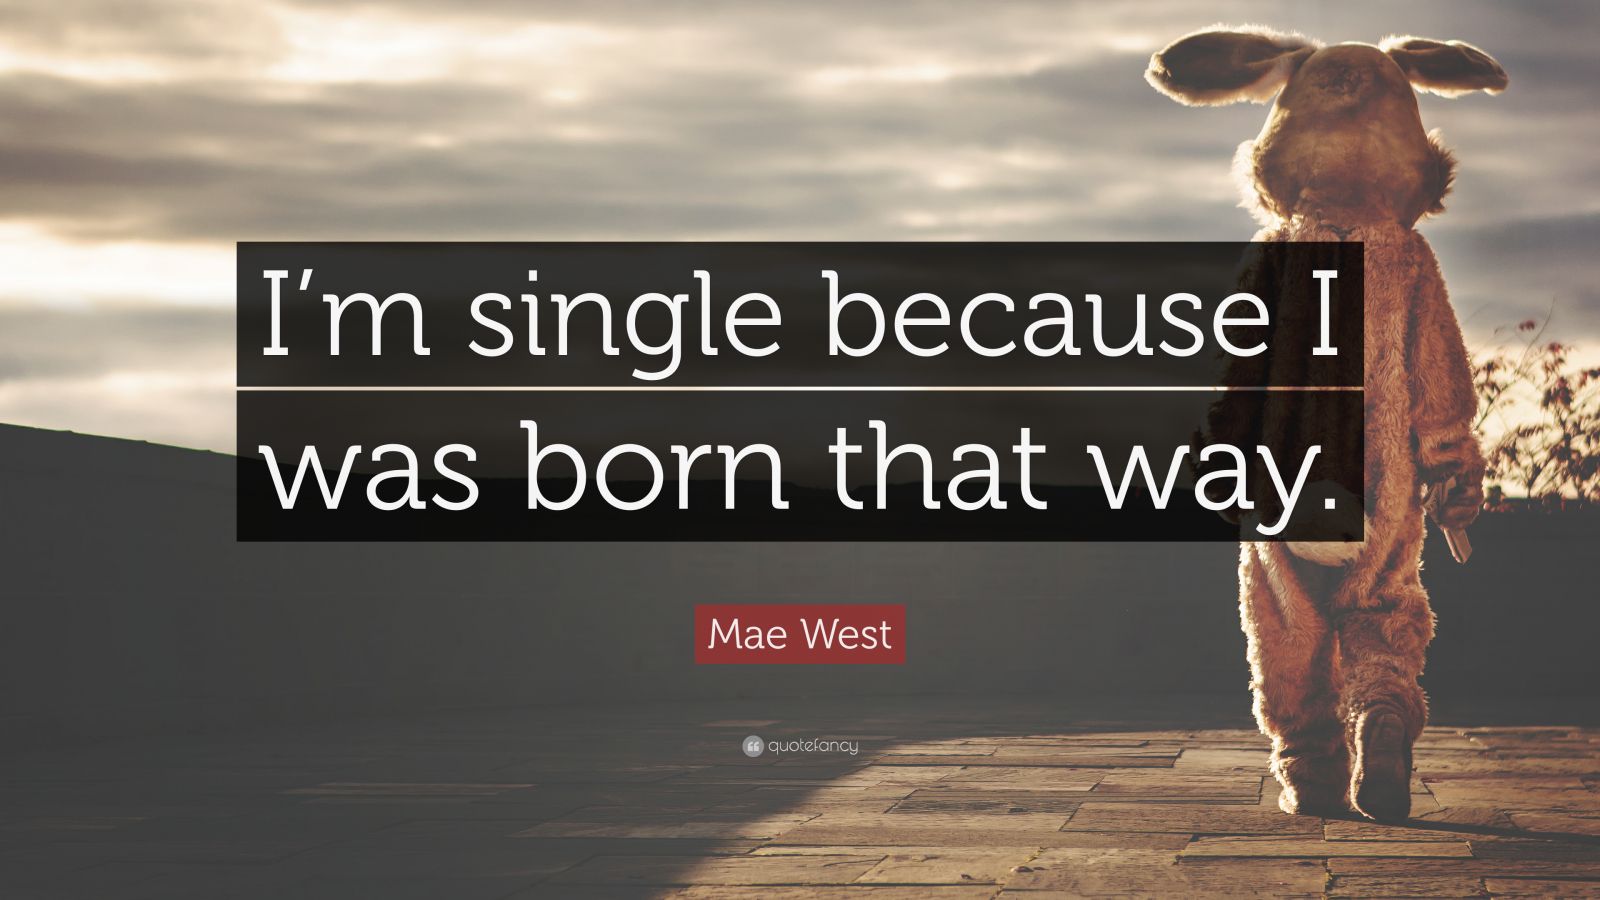 Mae West Quote: “I'm single because I was born that way.”